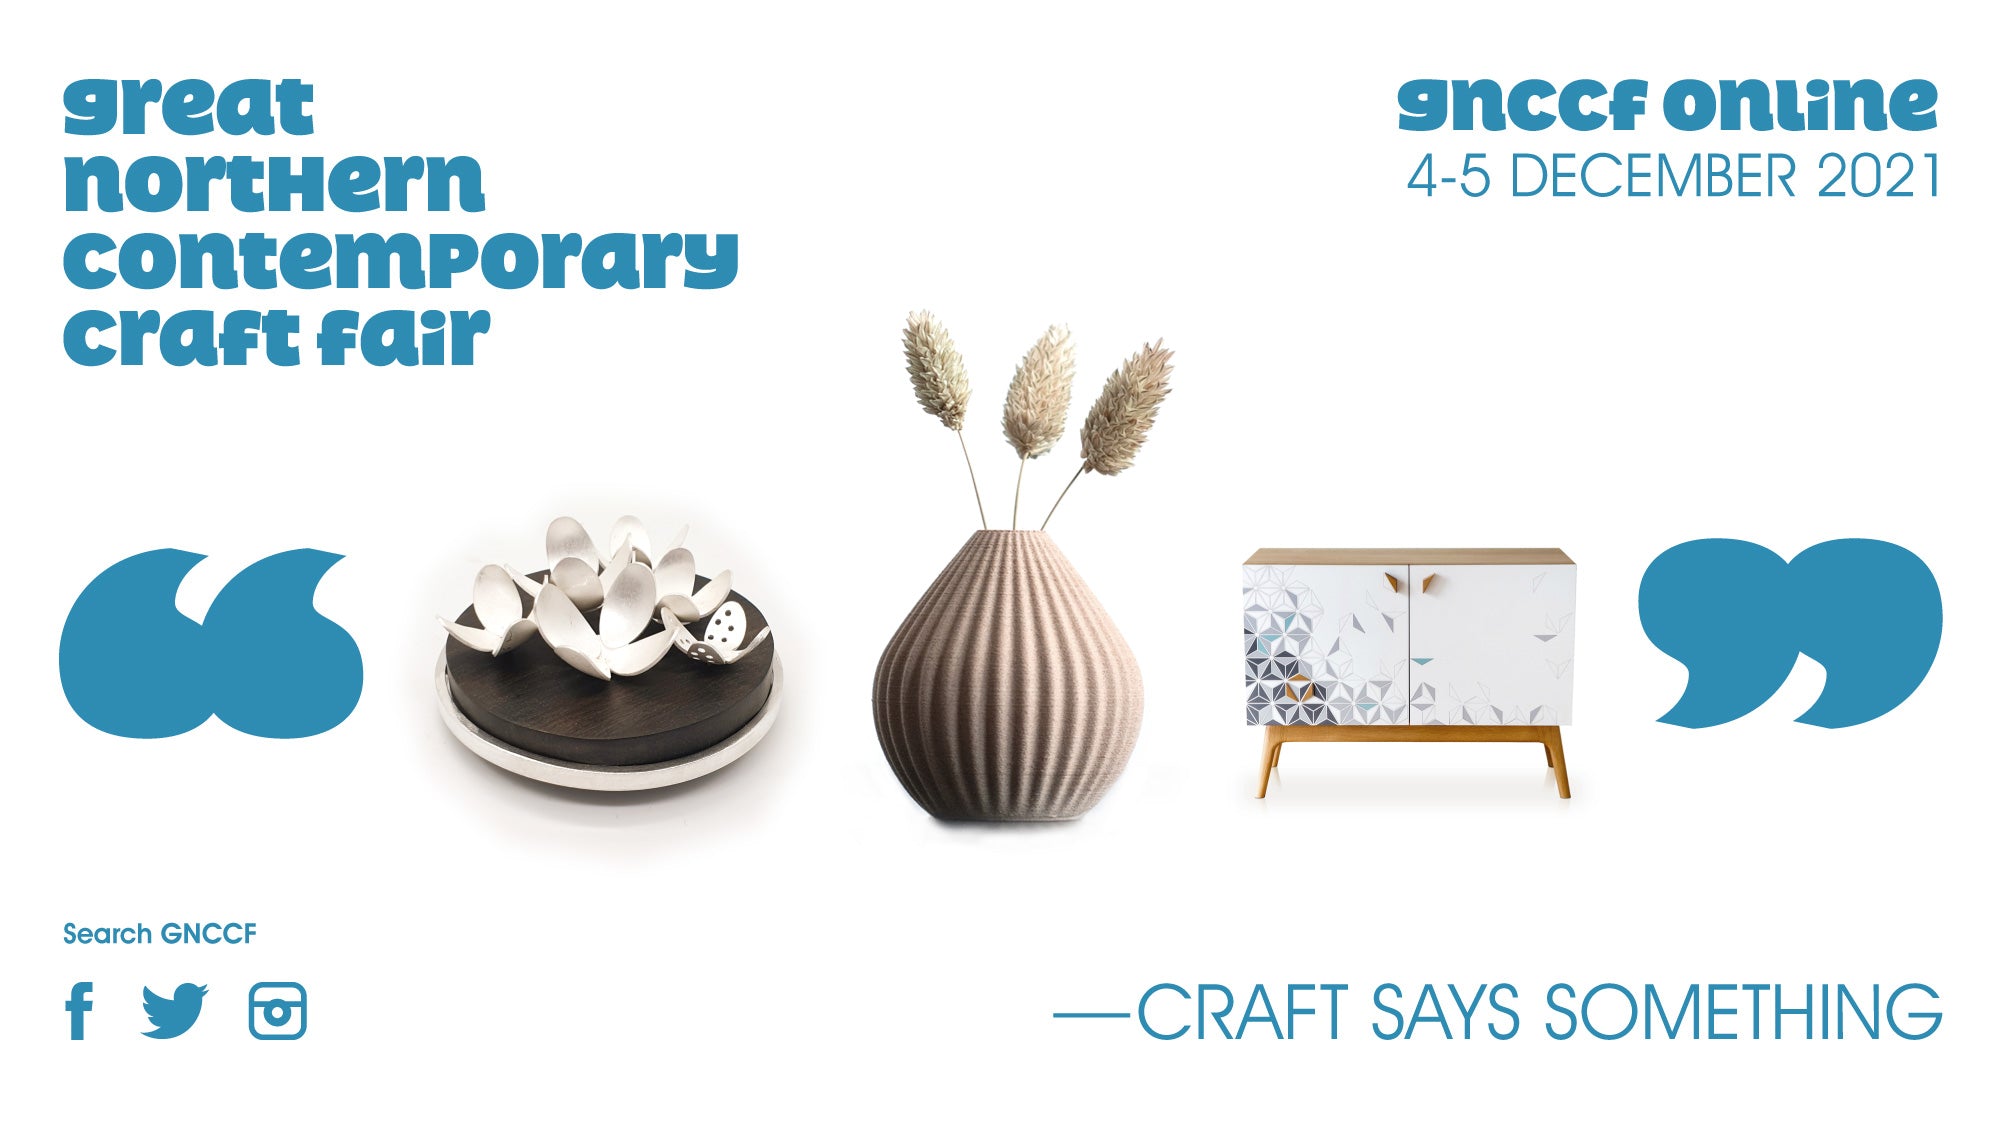 THE GREAT NORTHERN CONTEMPORARY CRAFT FAIR ONLINE CHRISTMAS SHOPPING EVENT